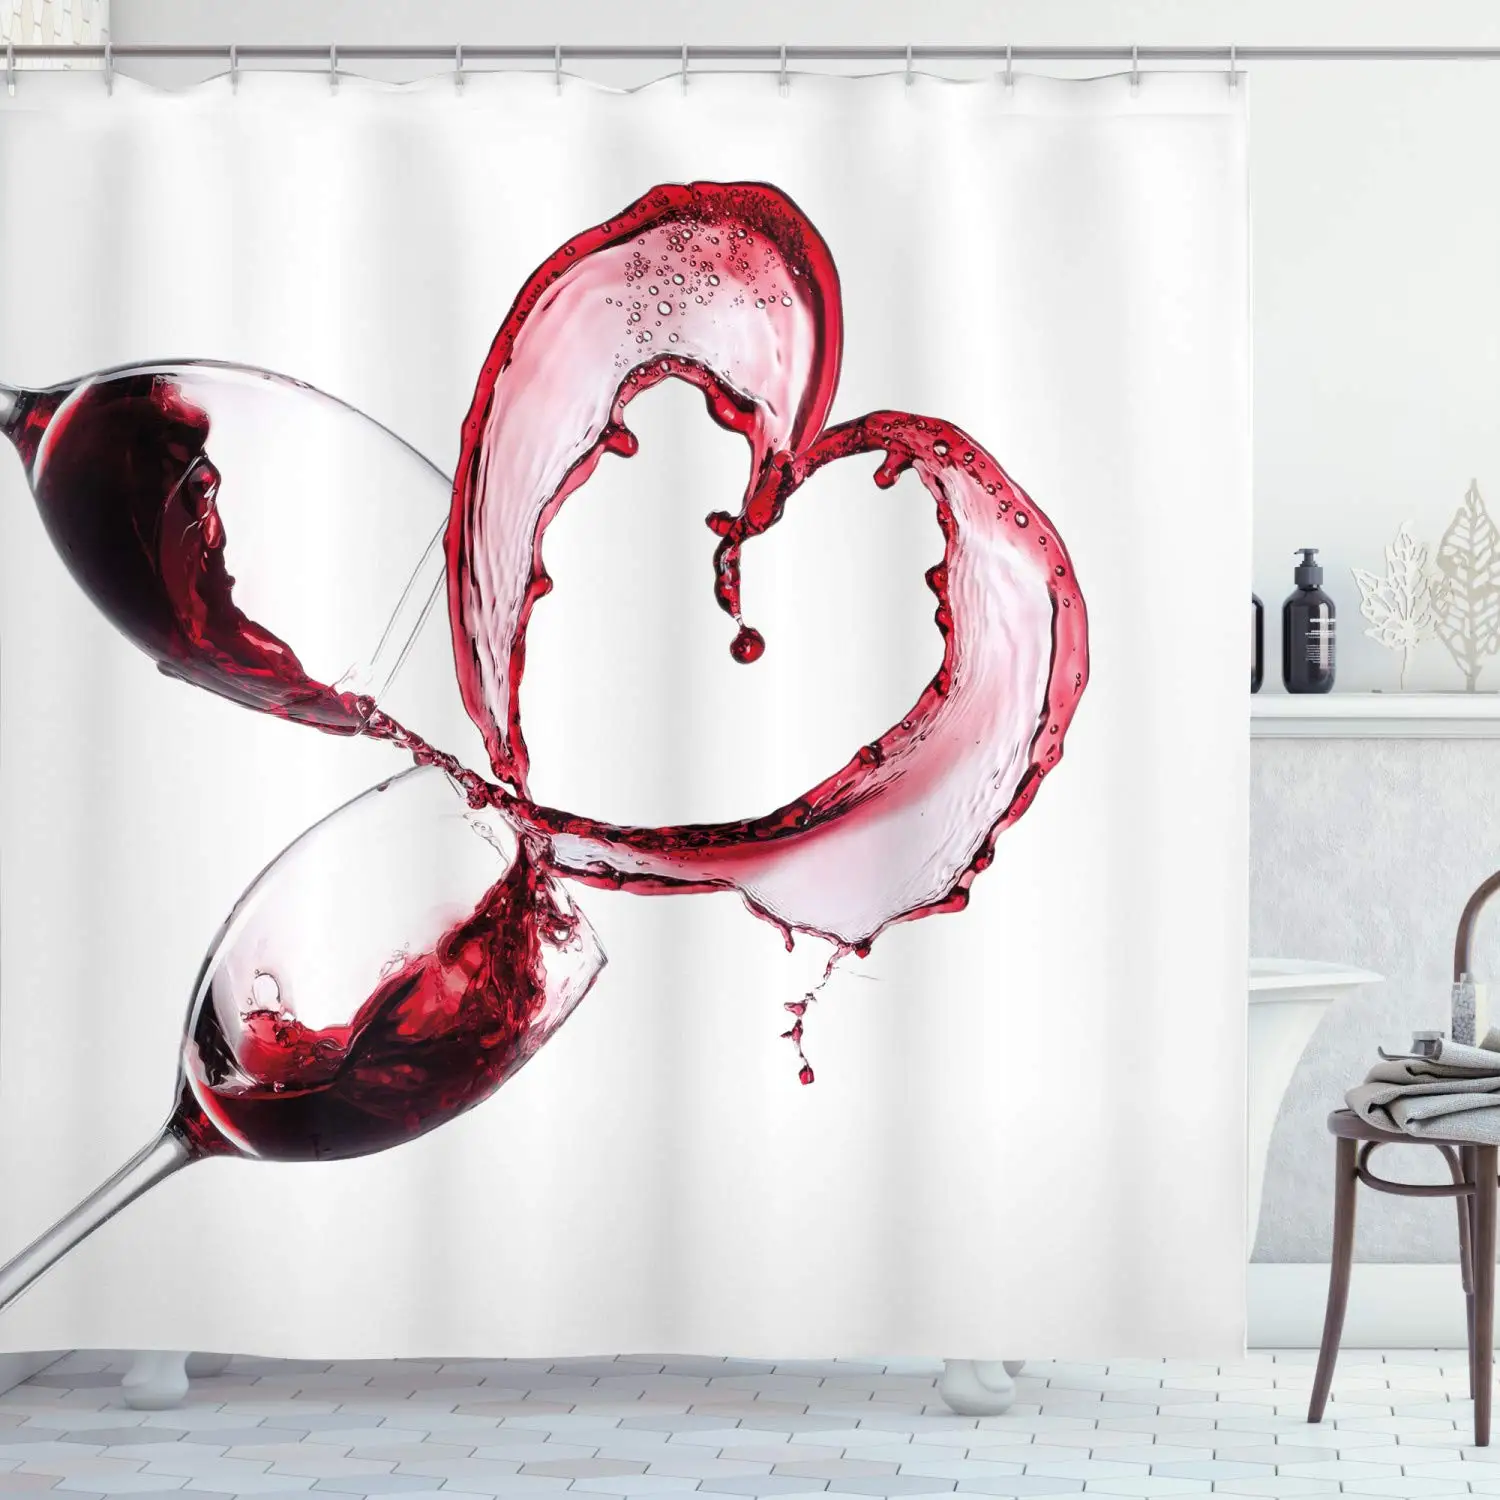 

Red Rose Wine Shower Curtain Bathroom Decor Valentines Romantic Floral Blooming Flower Lovers Couple Candles Fabric Polyester